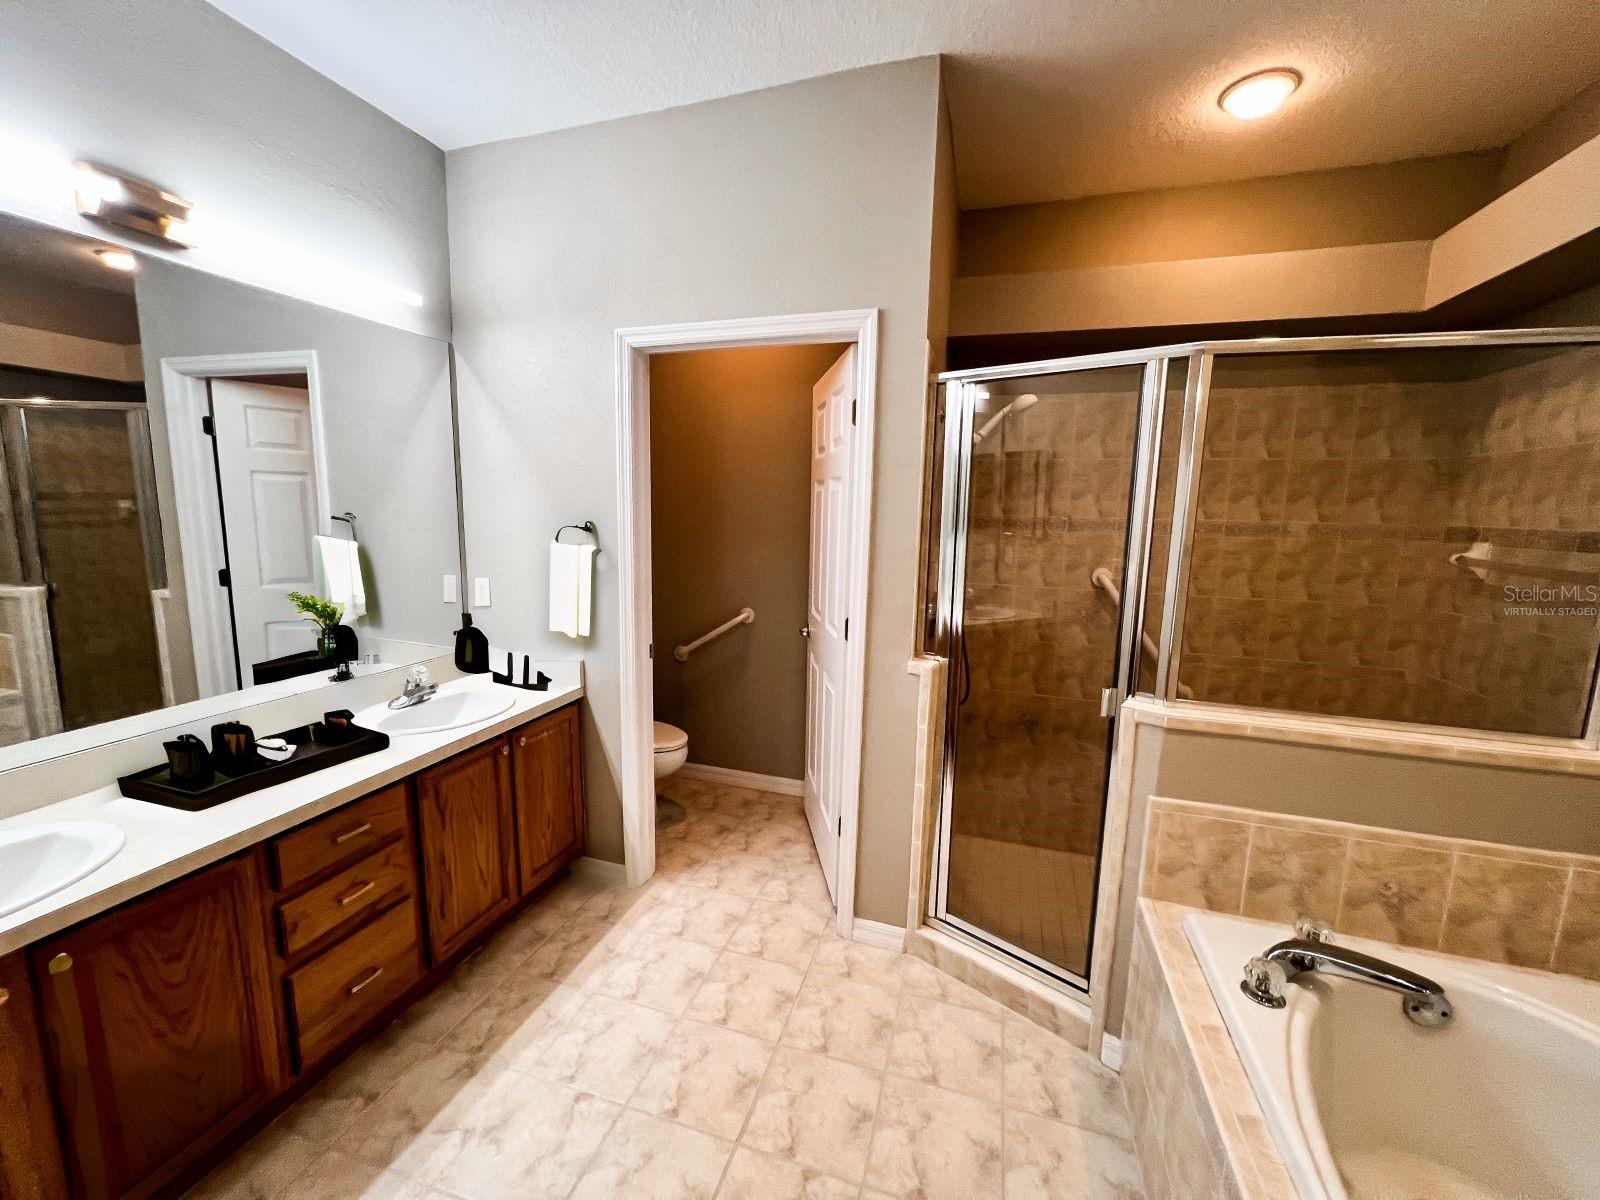 Virtually Staged Gargen Bath ensuite to the Owner's Retreat